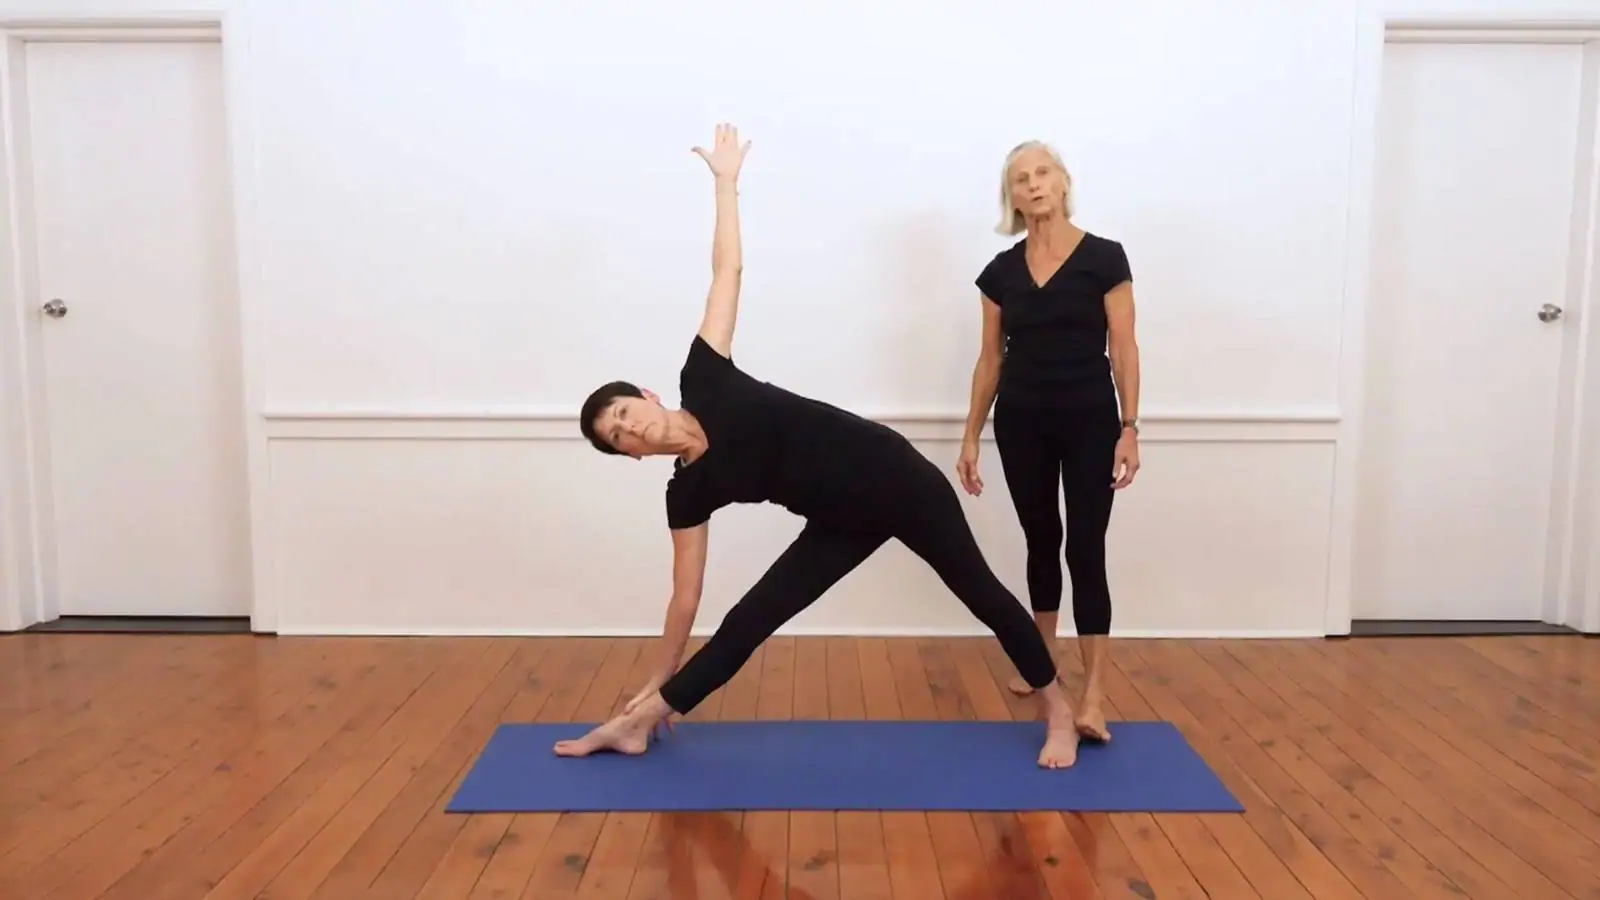 CHAIR YOGA SEQUENCE for Beginners | Lucilehr.com